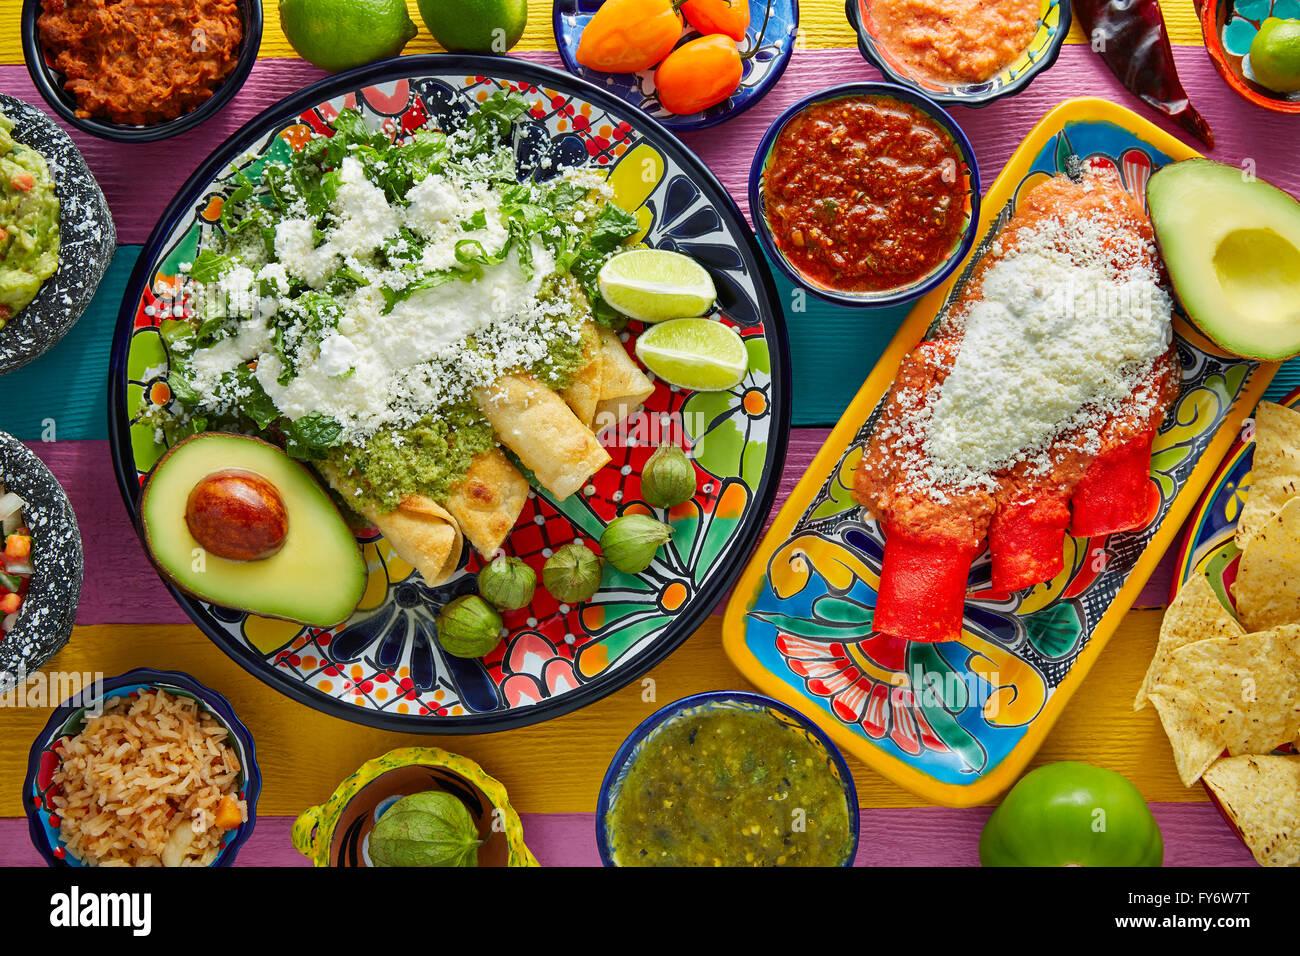 Green and red enchiladas with mexican sauces mix in colorful table Stock Photo